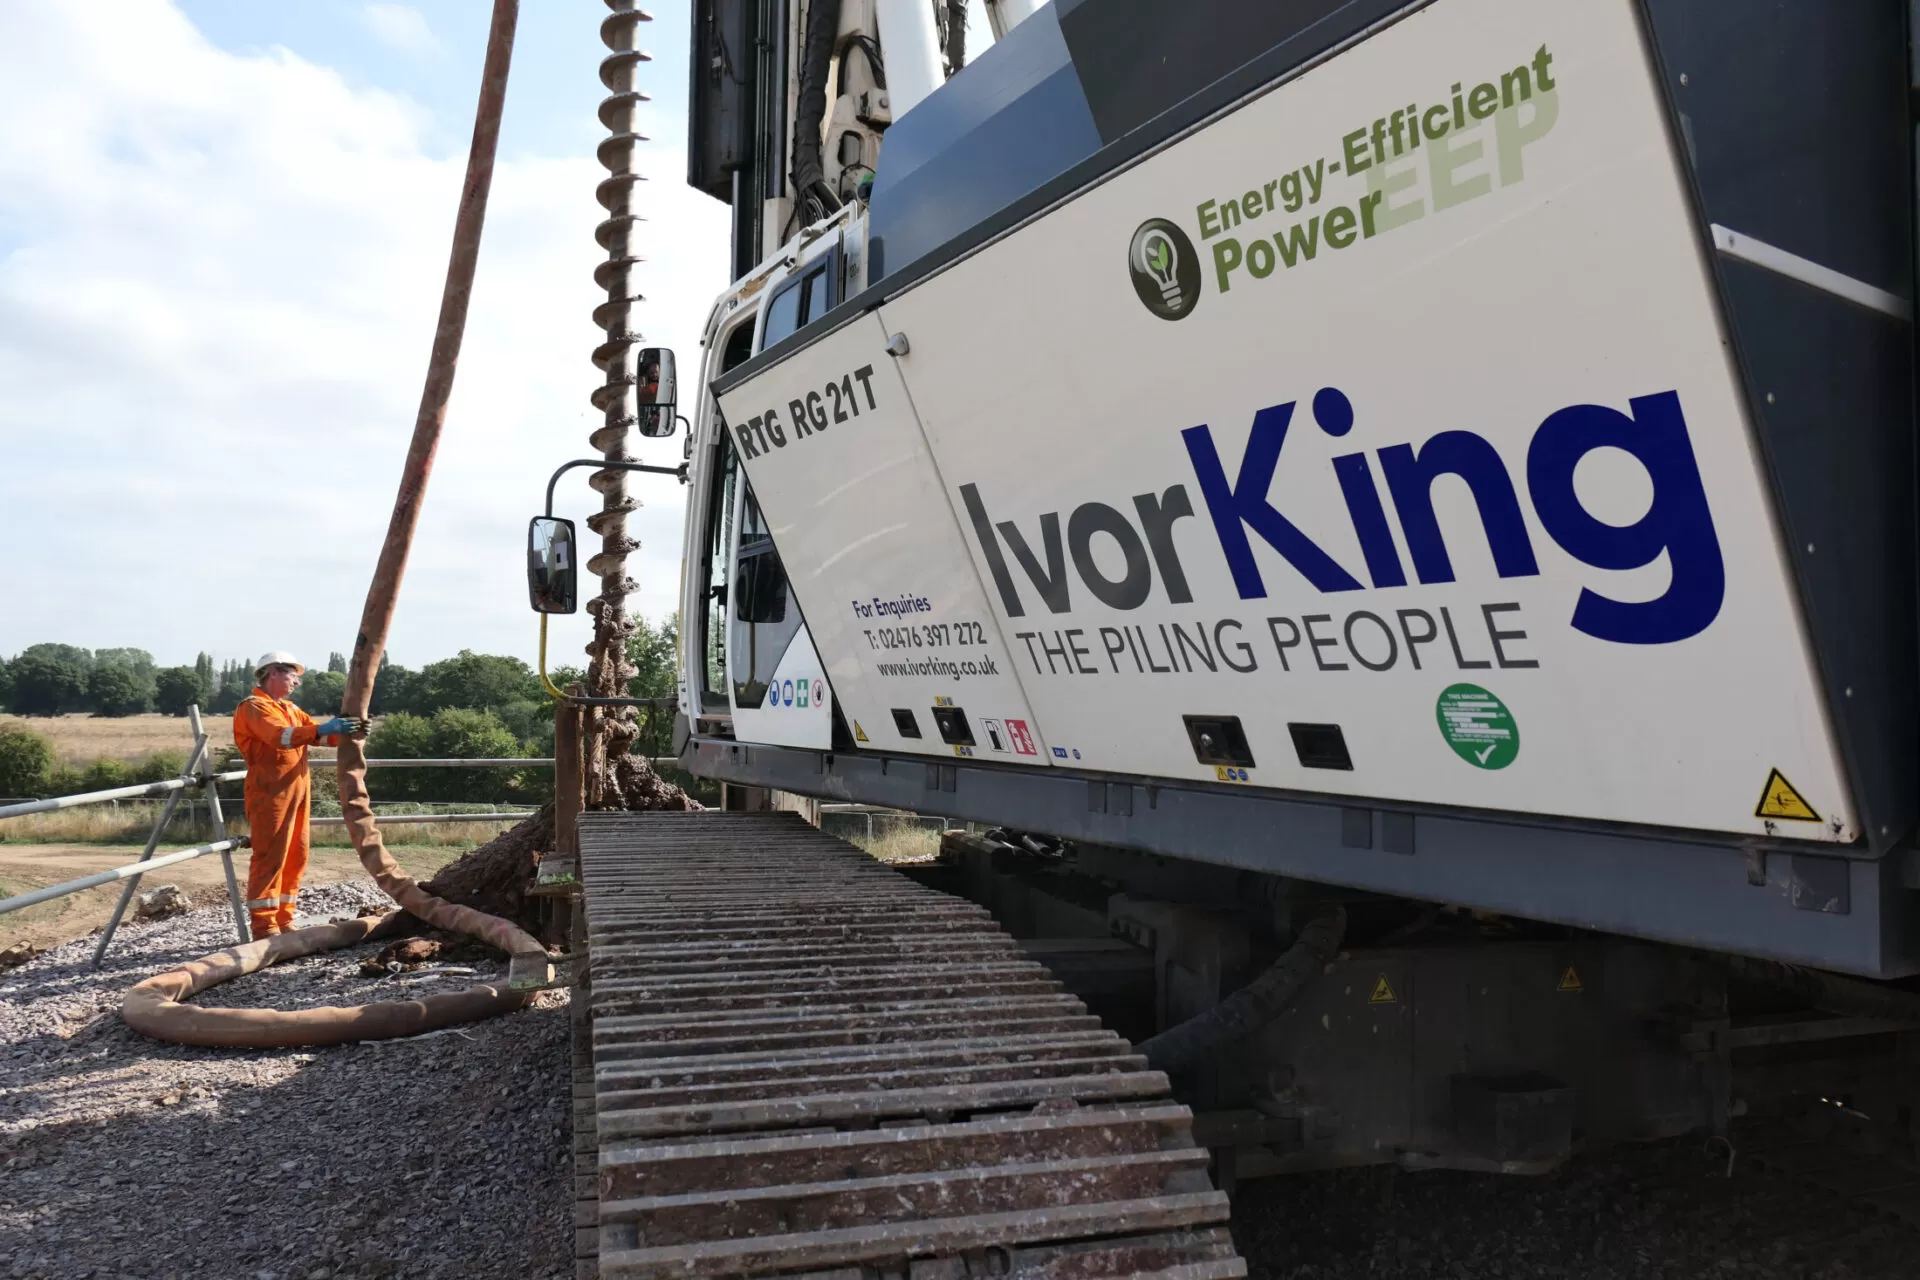 Piling solutions